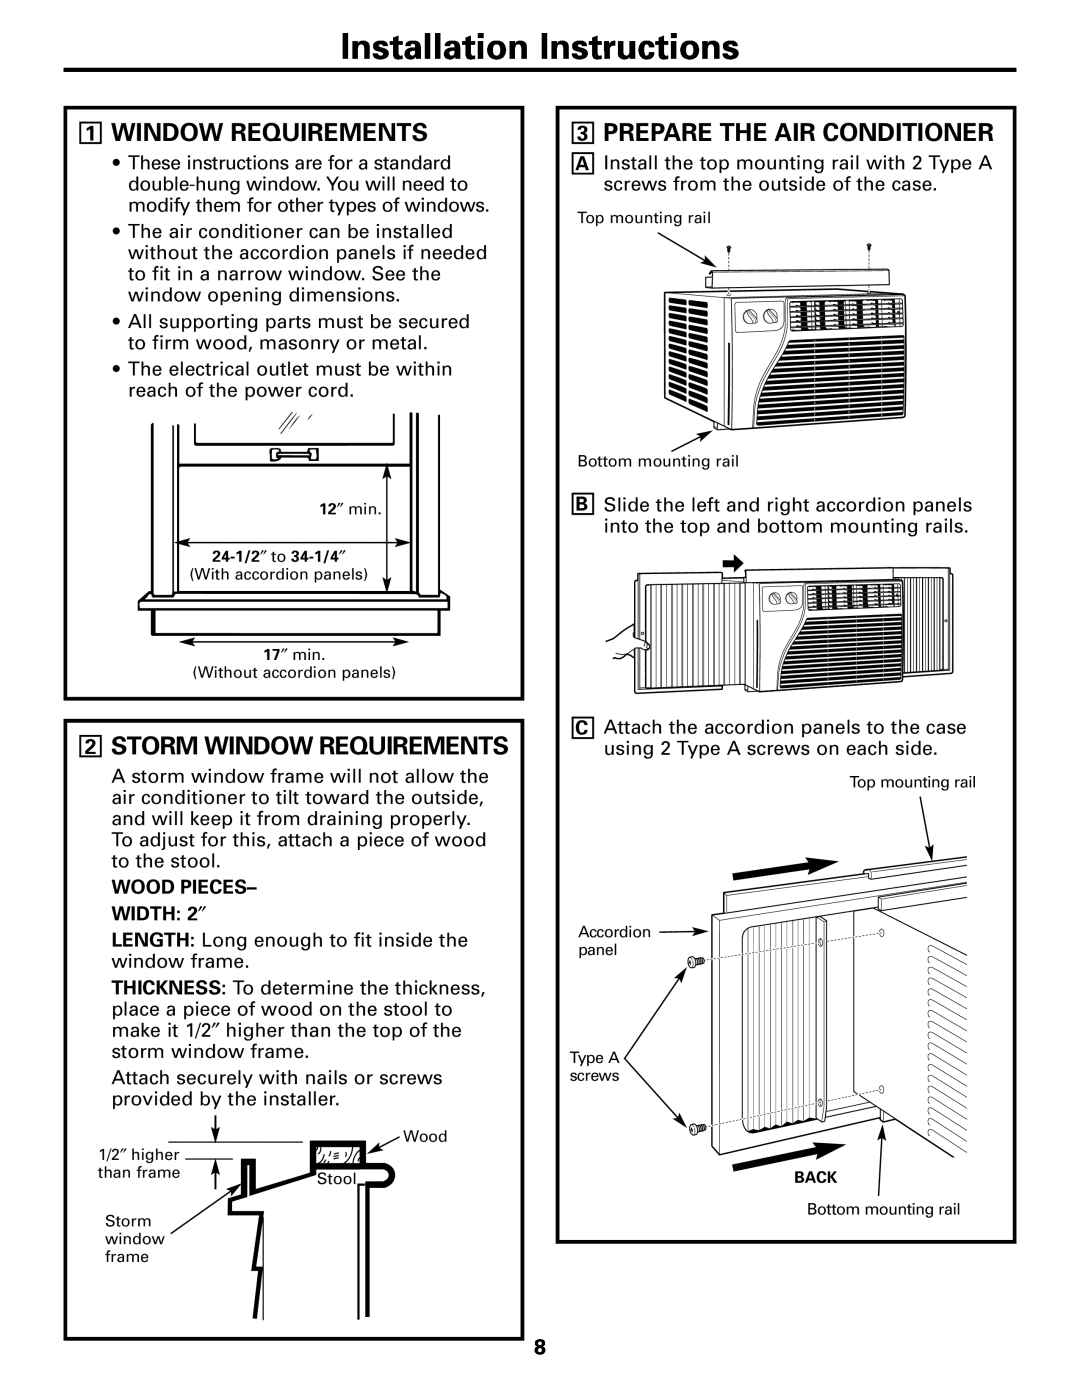 GE AER05 1WINDOW REQUIREMENTS, 2STORM WINDOW REQUIREMENTS, 3PREPARE THE AIR CONDITIONER, Installation Instructions 